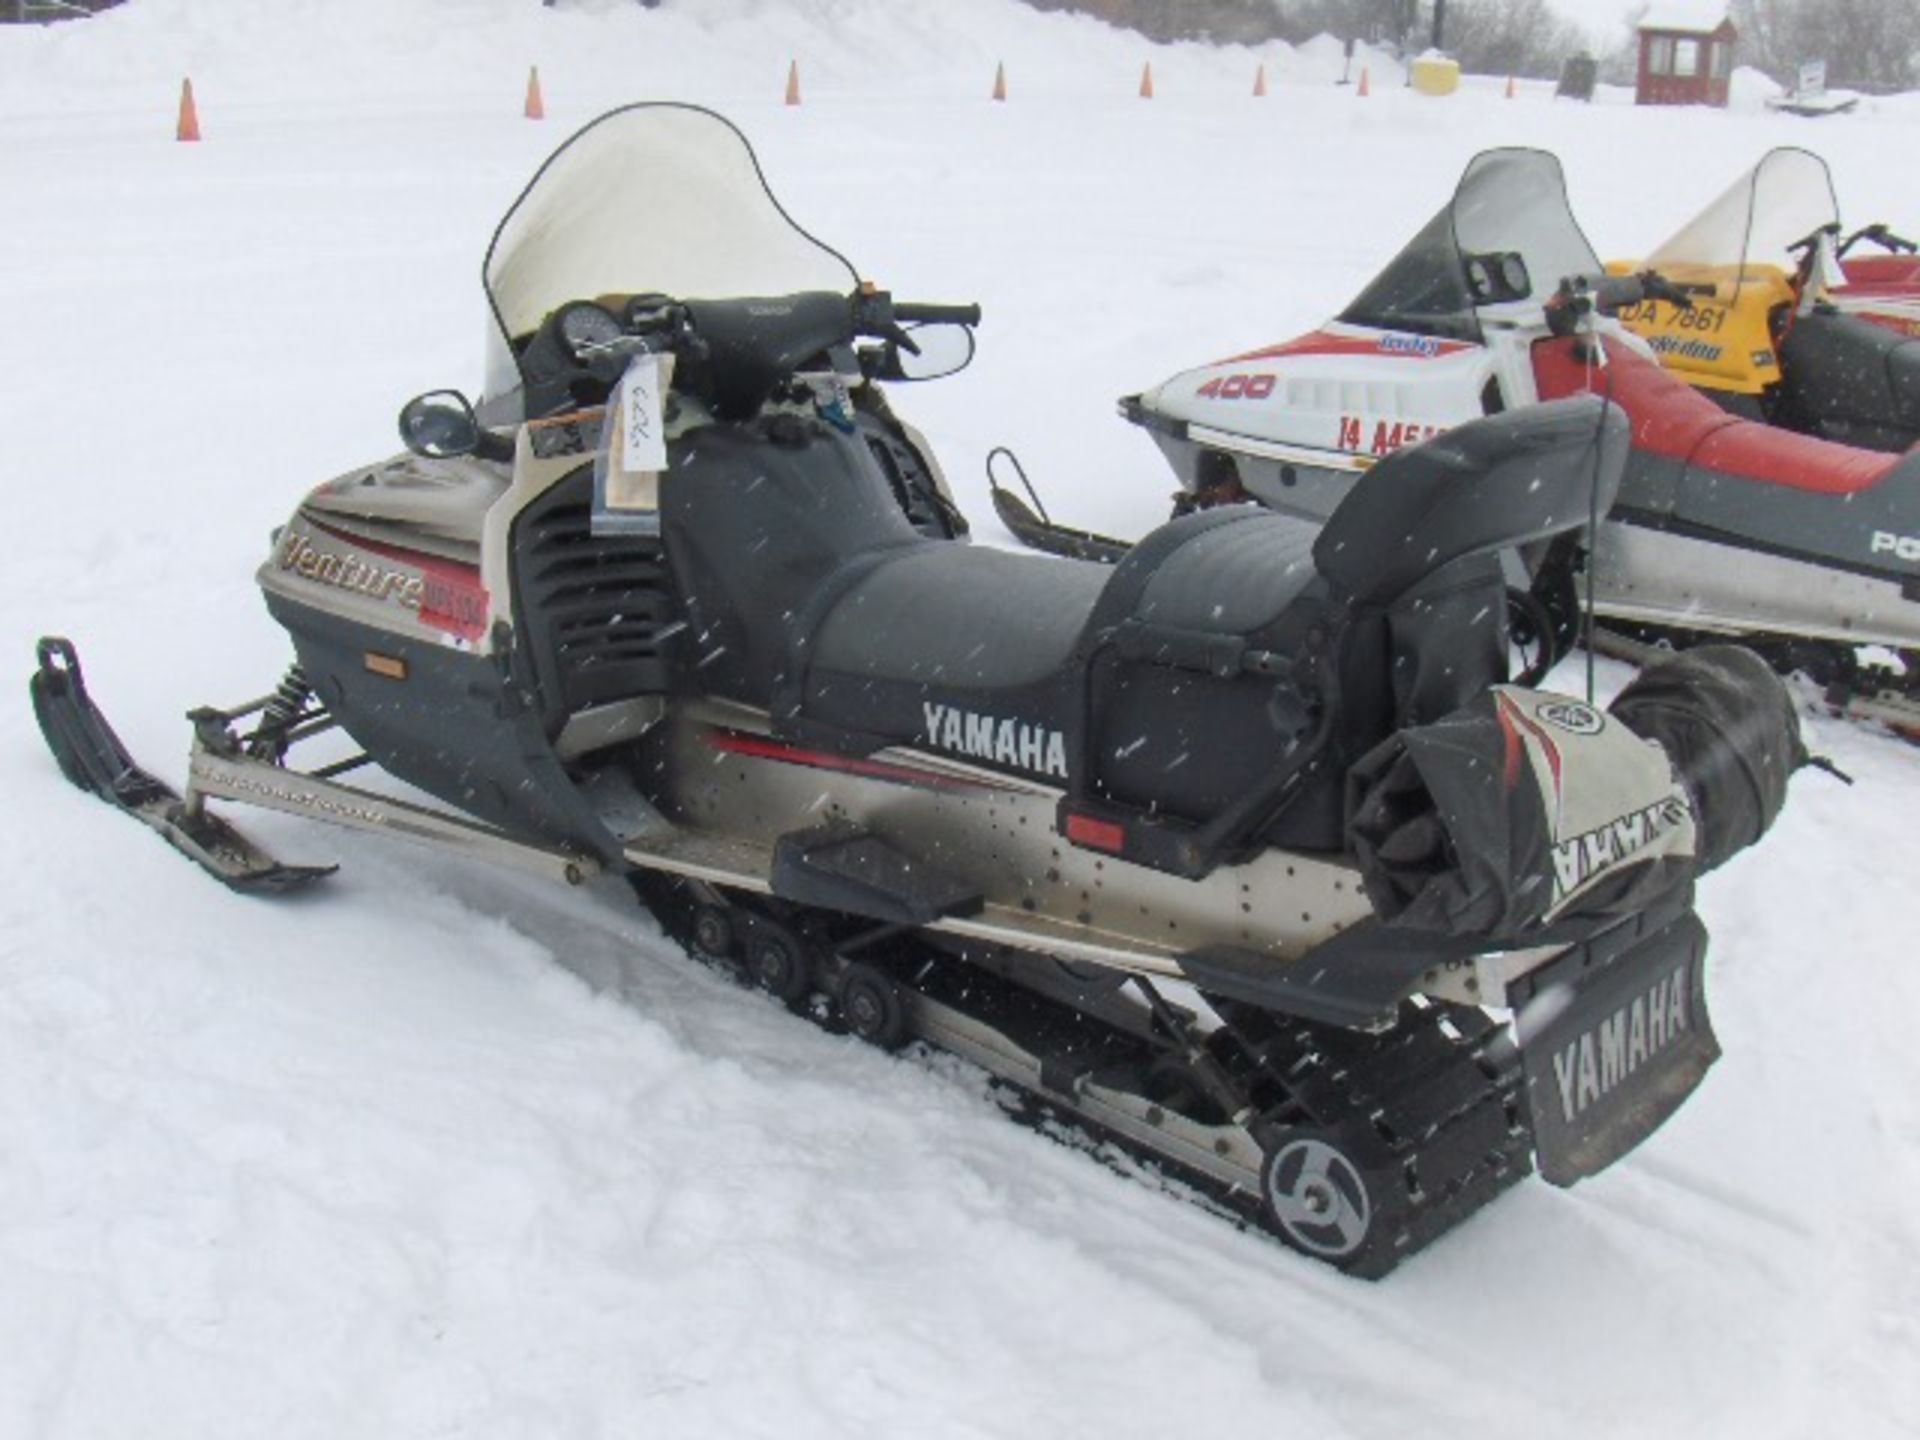 2001 YAMAHA 500 VENTURE  8CY009425 snowmobile, owner started at time of auction check in, electric - Image 4 of 4